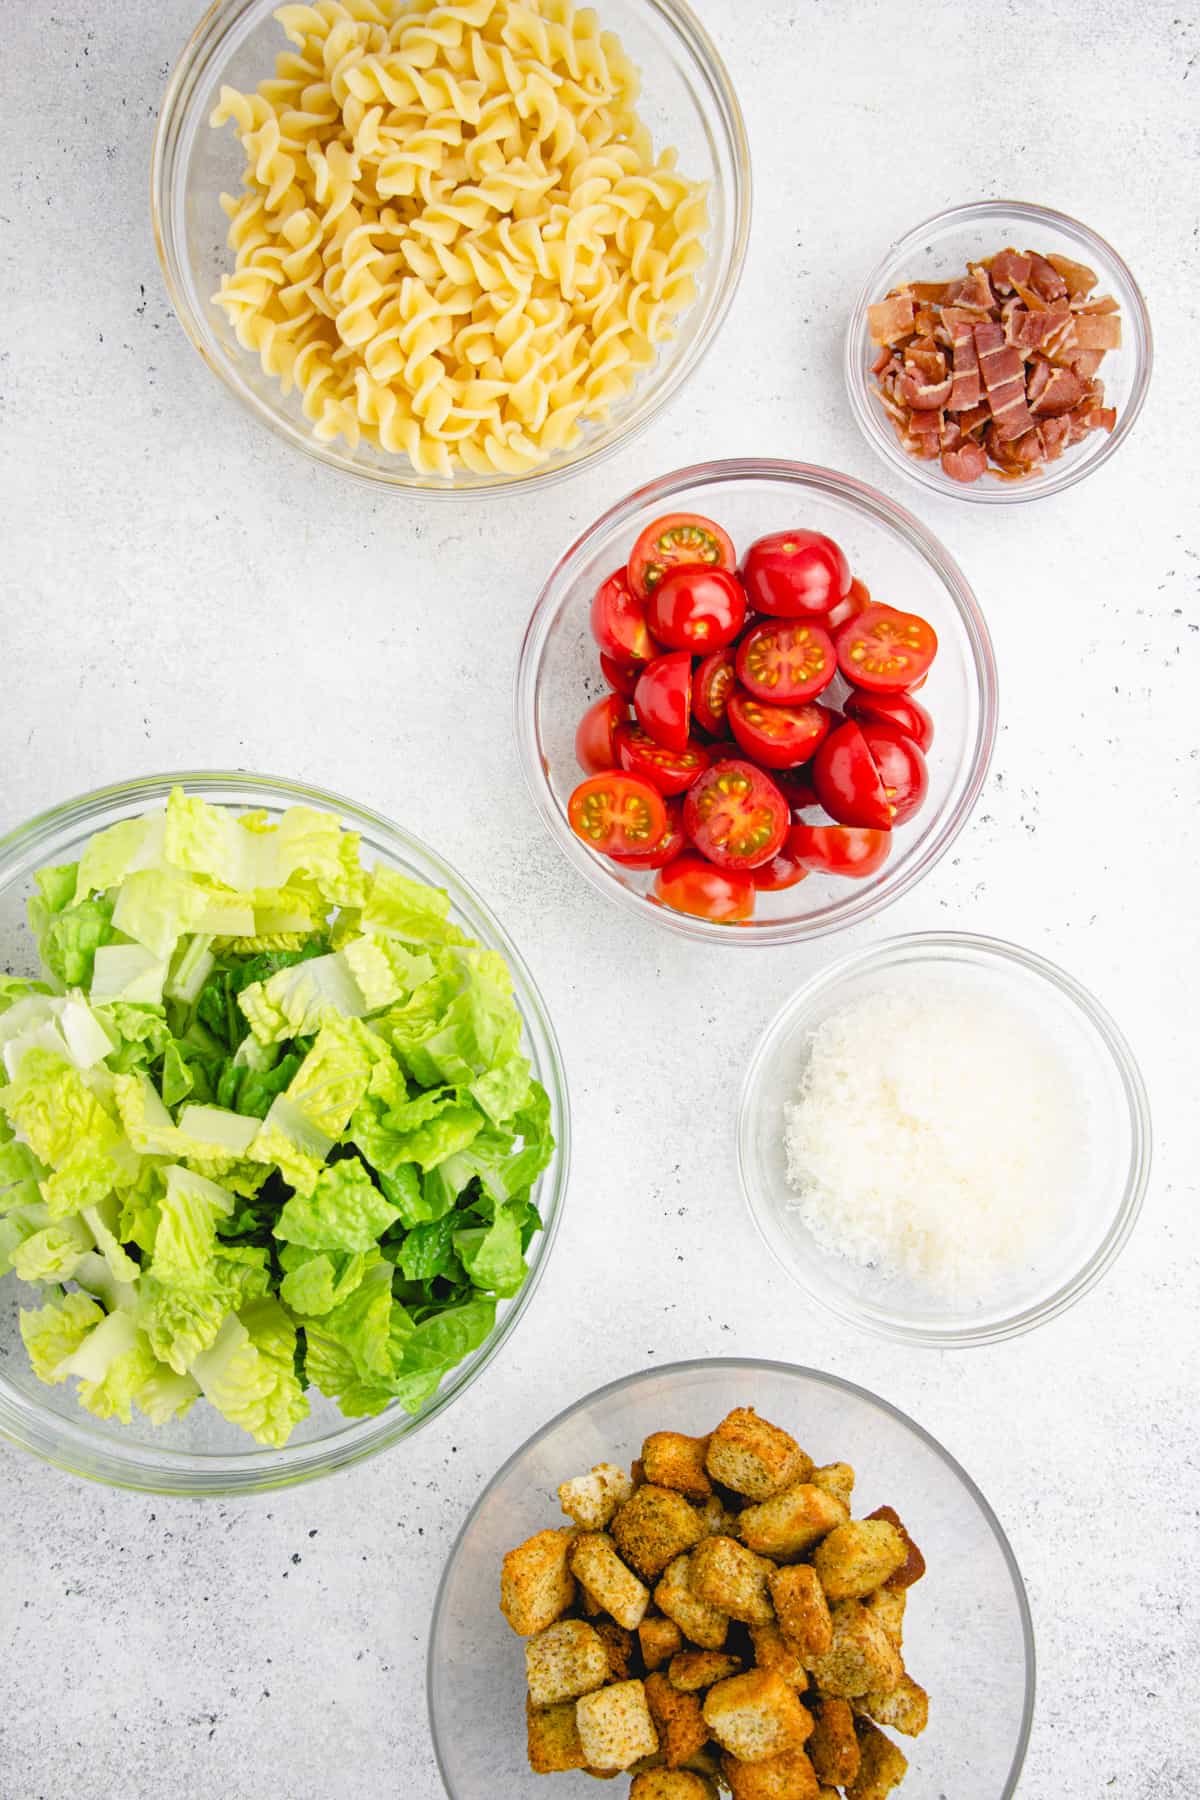 Chopped lettuce, cherry tomatoes, bacon, pasta, croutons, and Parmesan cheese in separate glass mixing bowls.